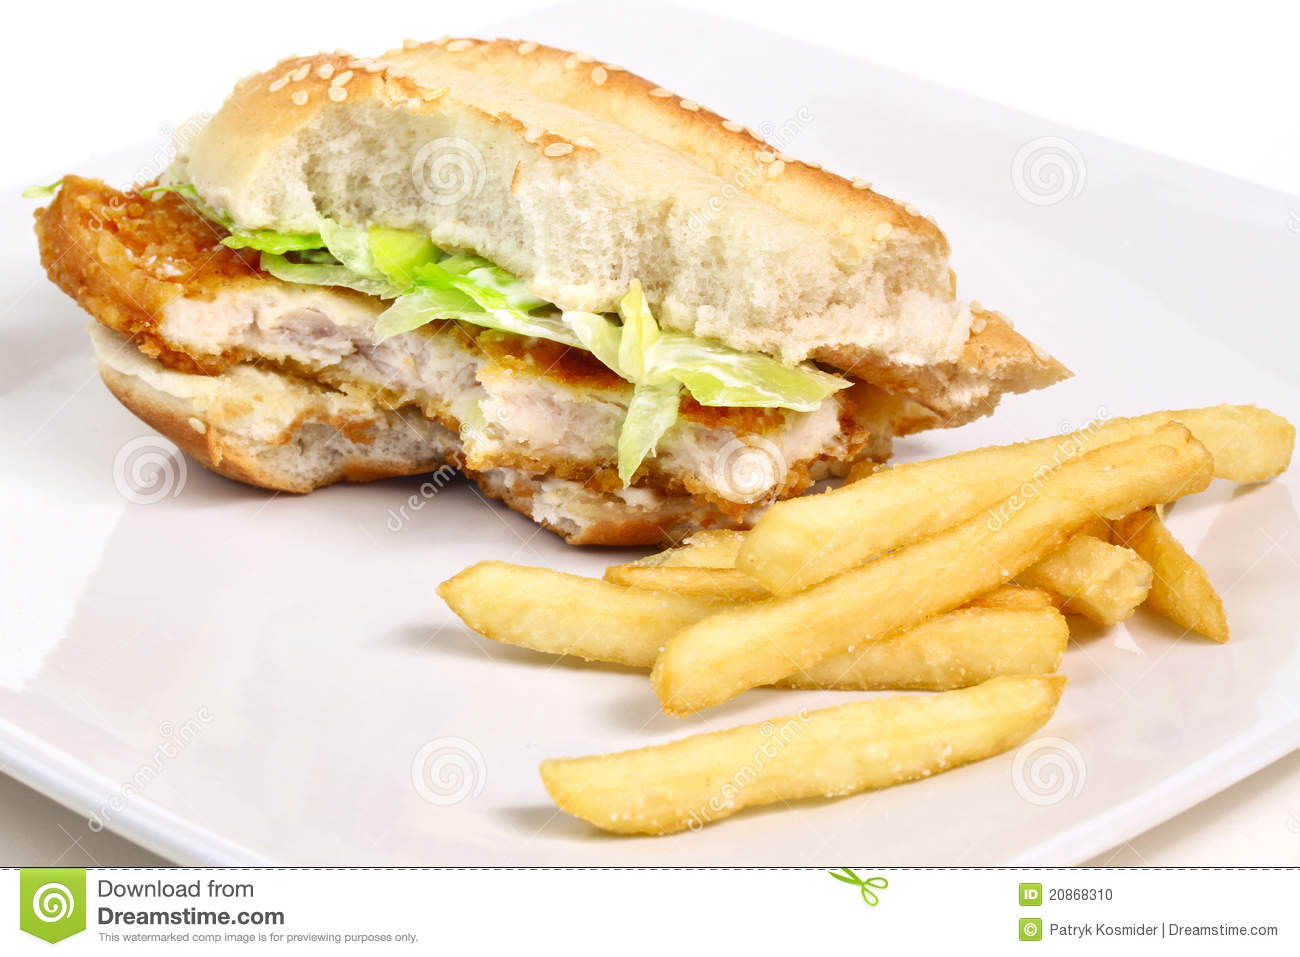 Chicken Burger With Chips Stock Photo   Image  20868310